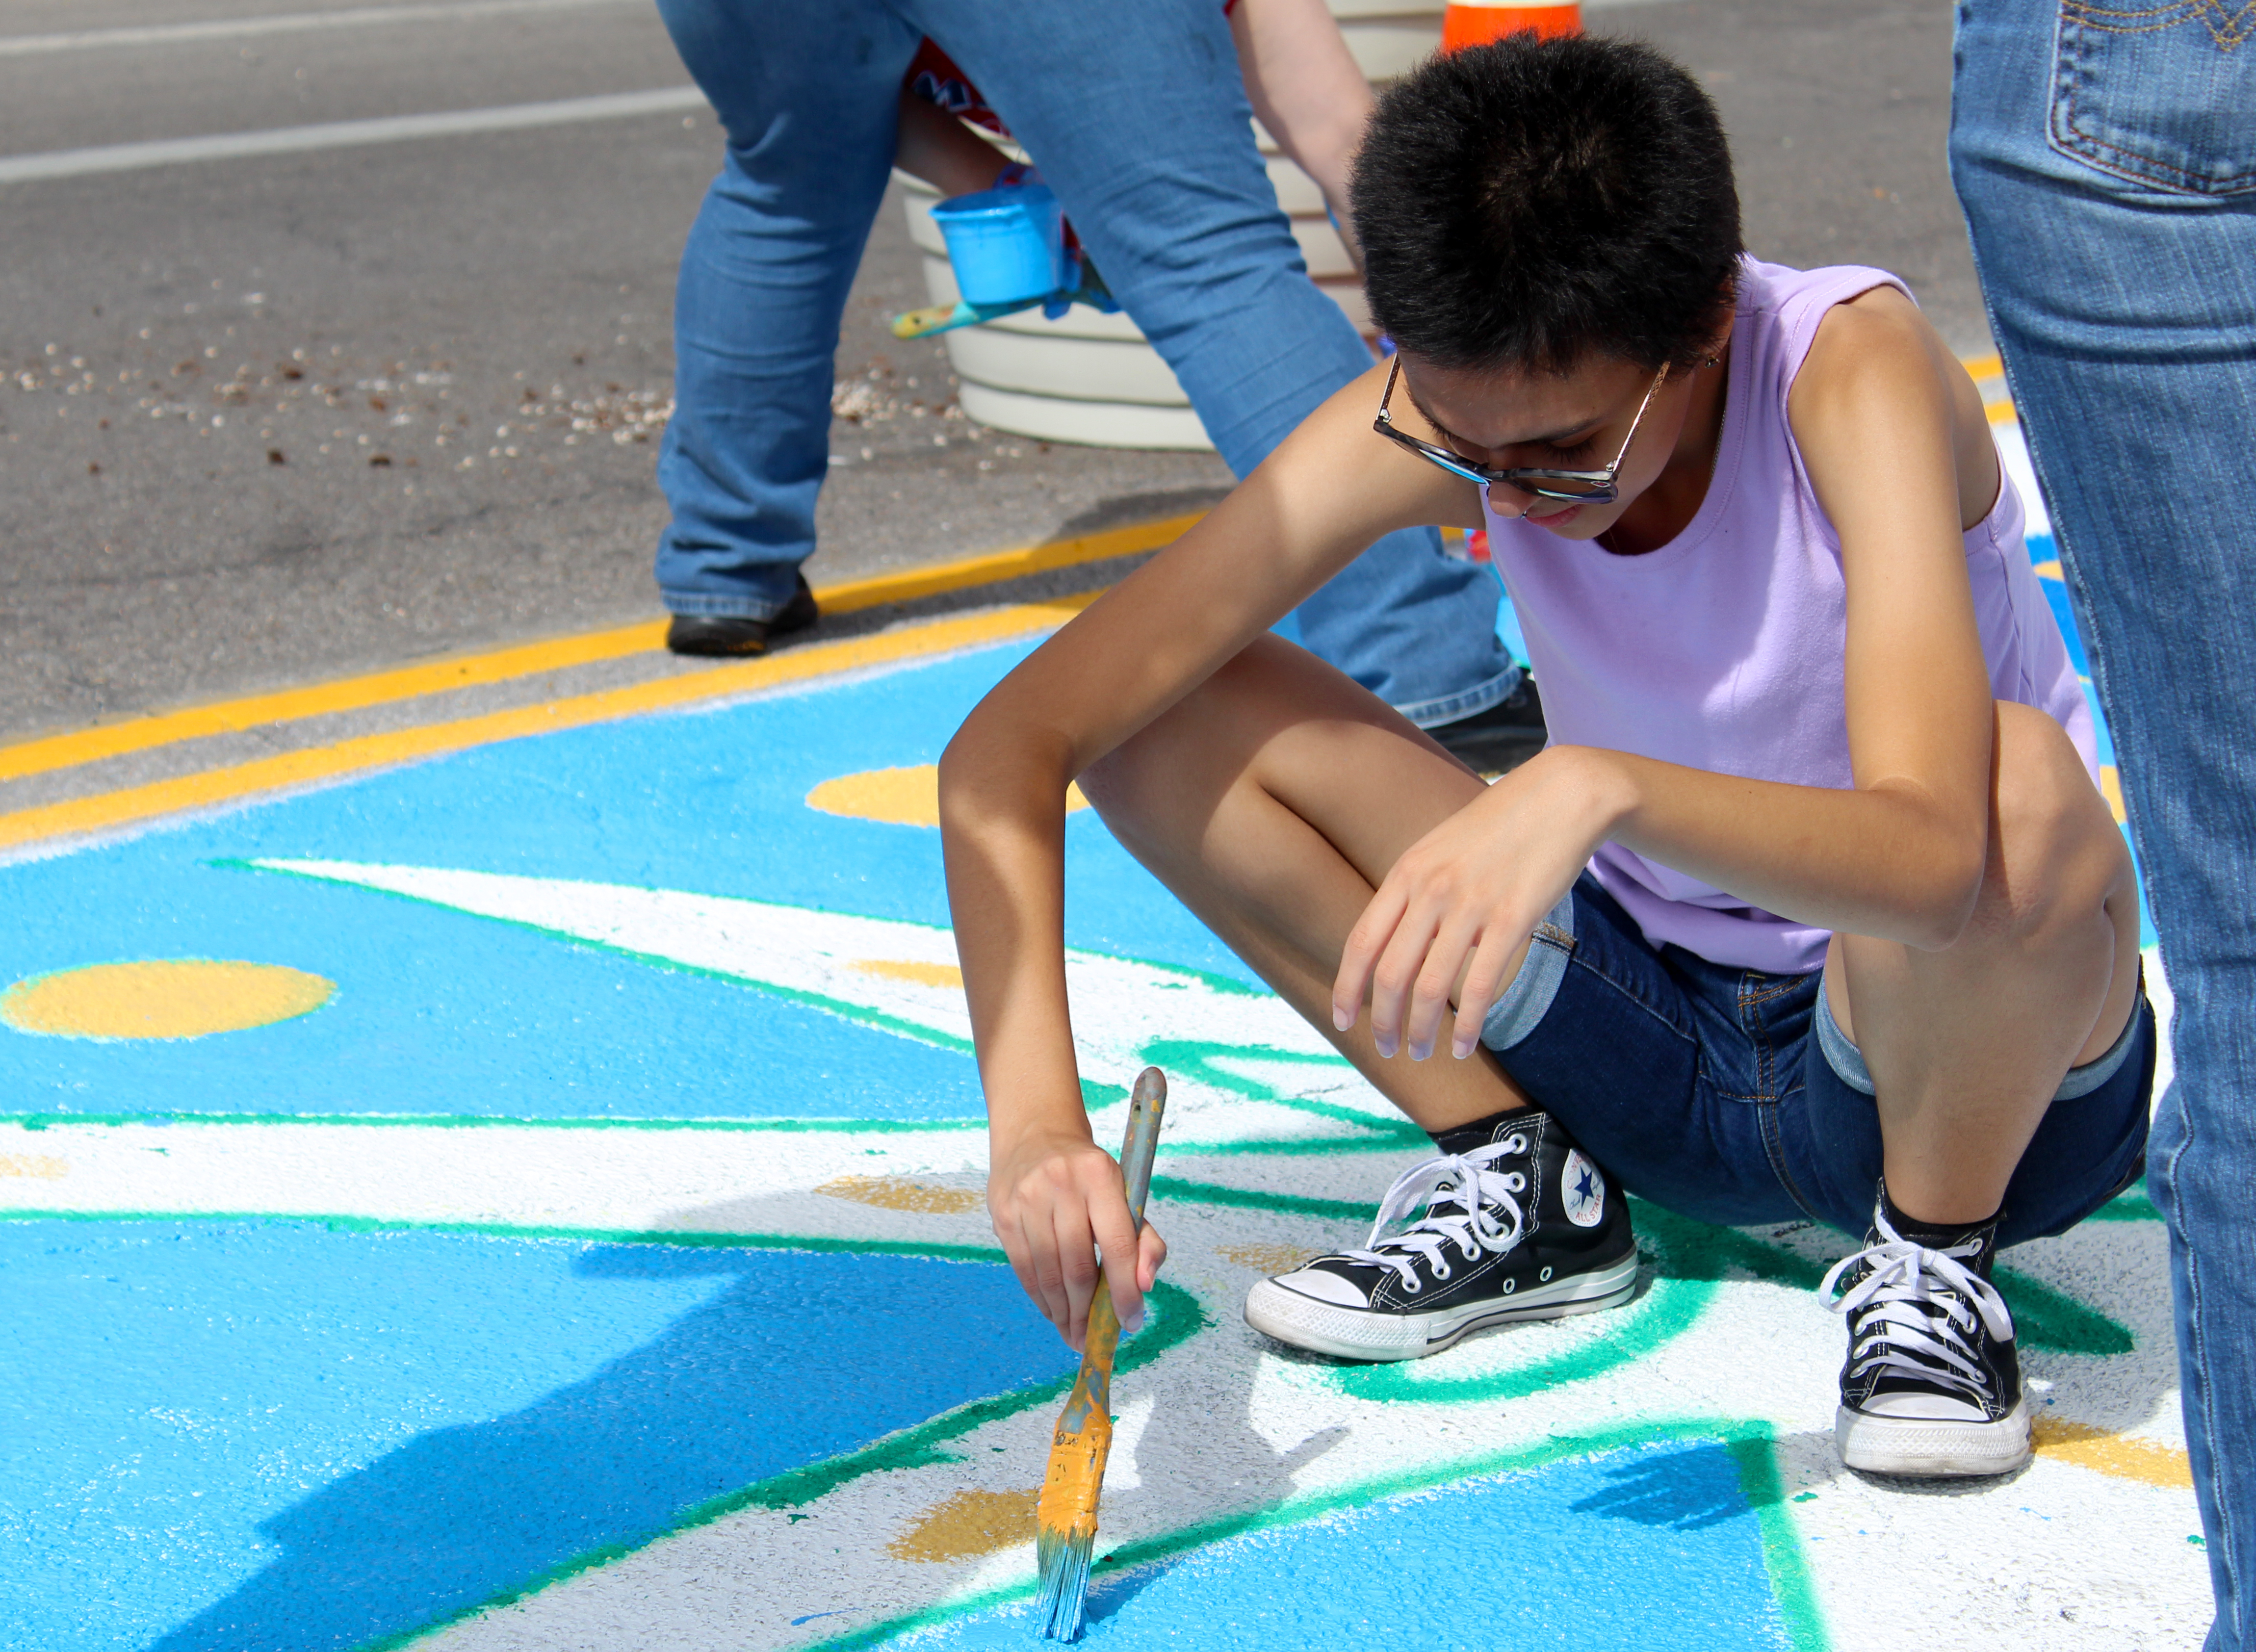 Volunteer painting on the ground.